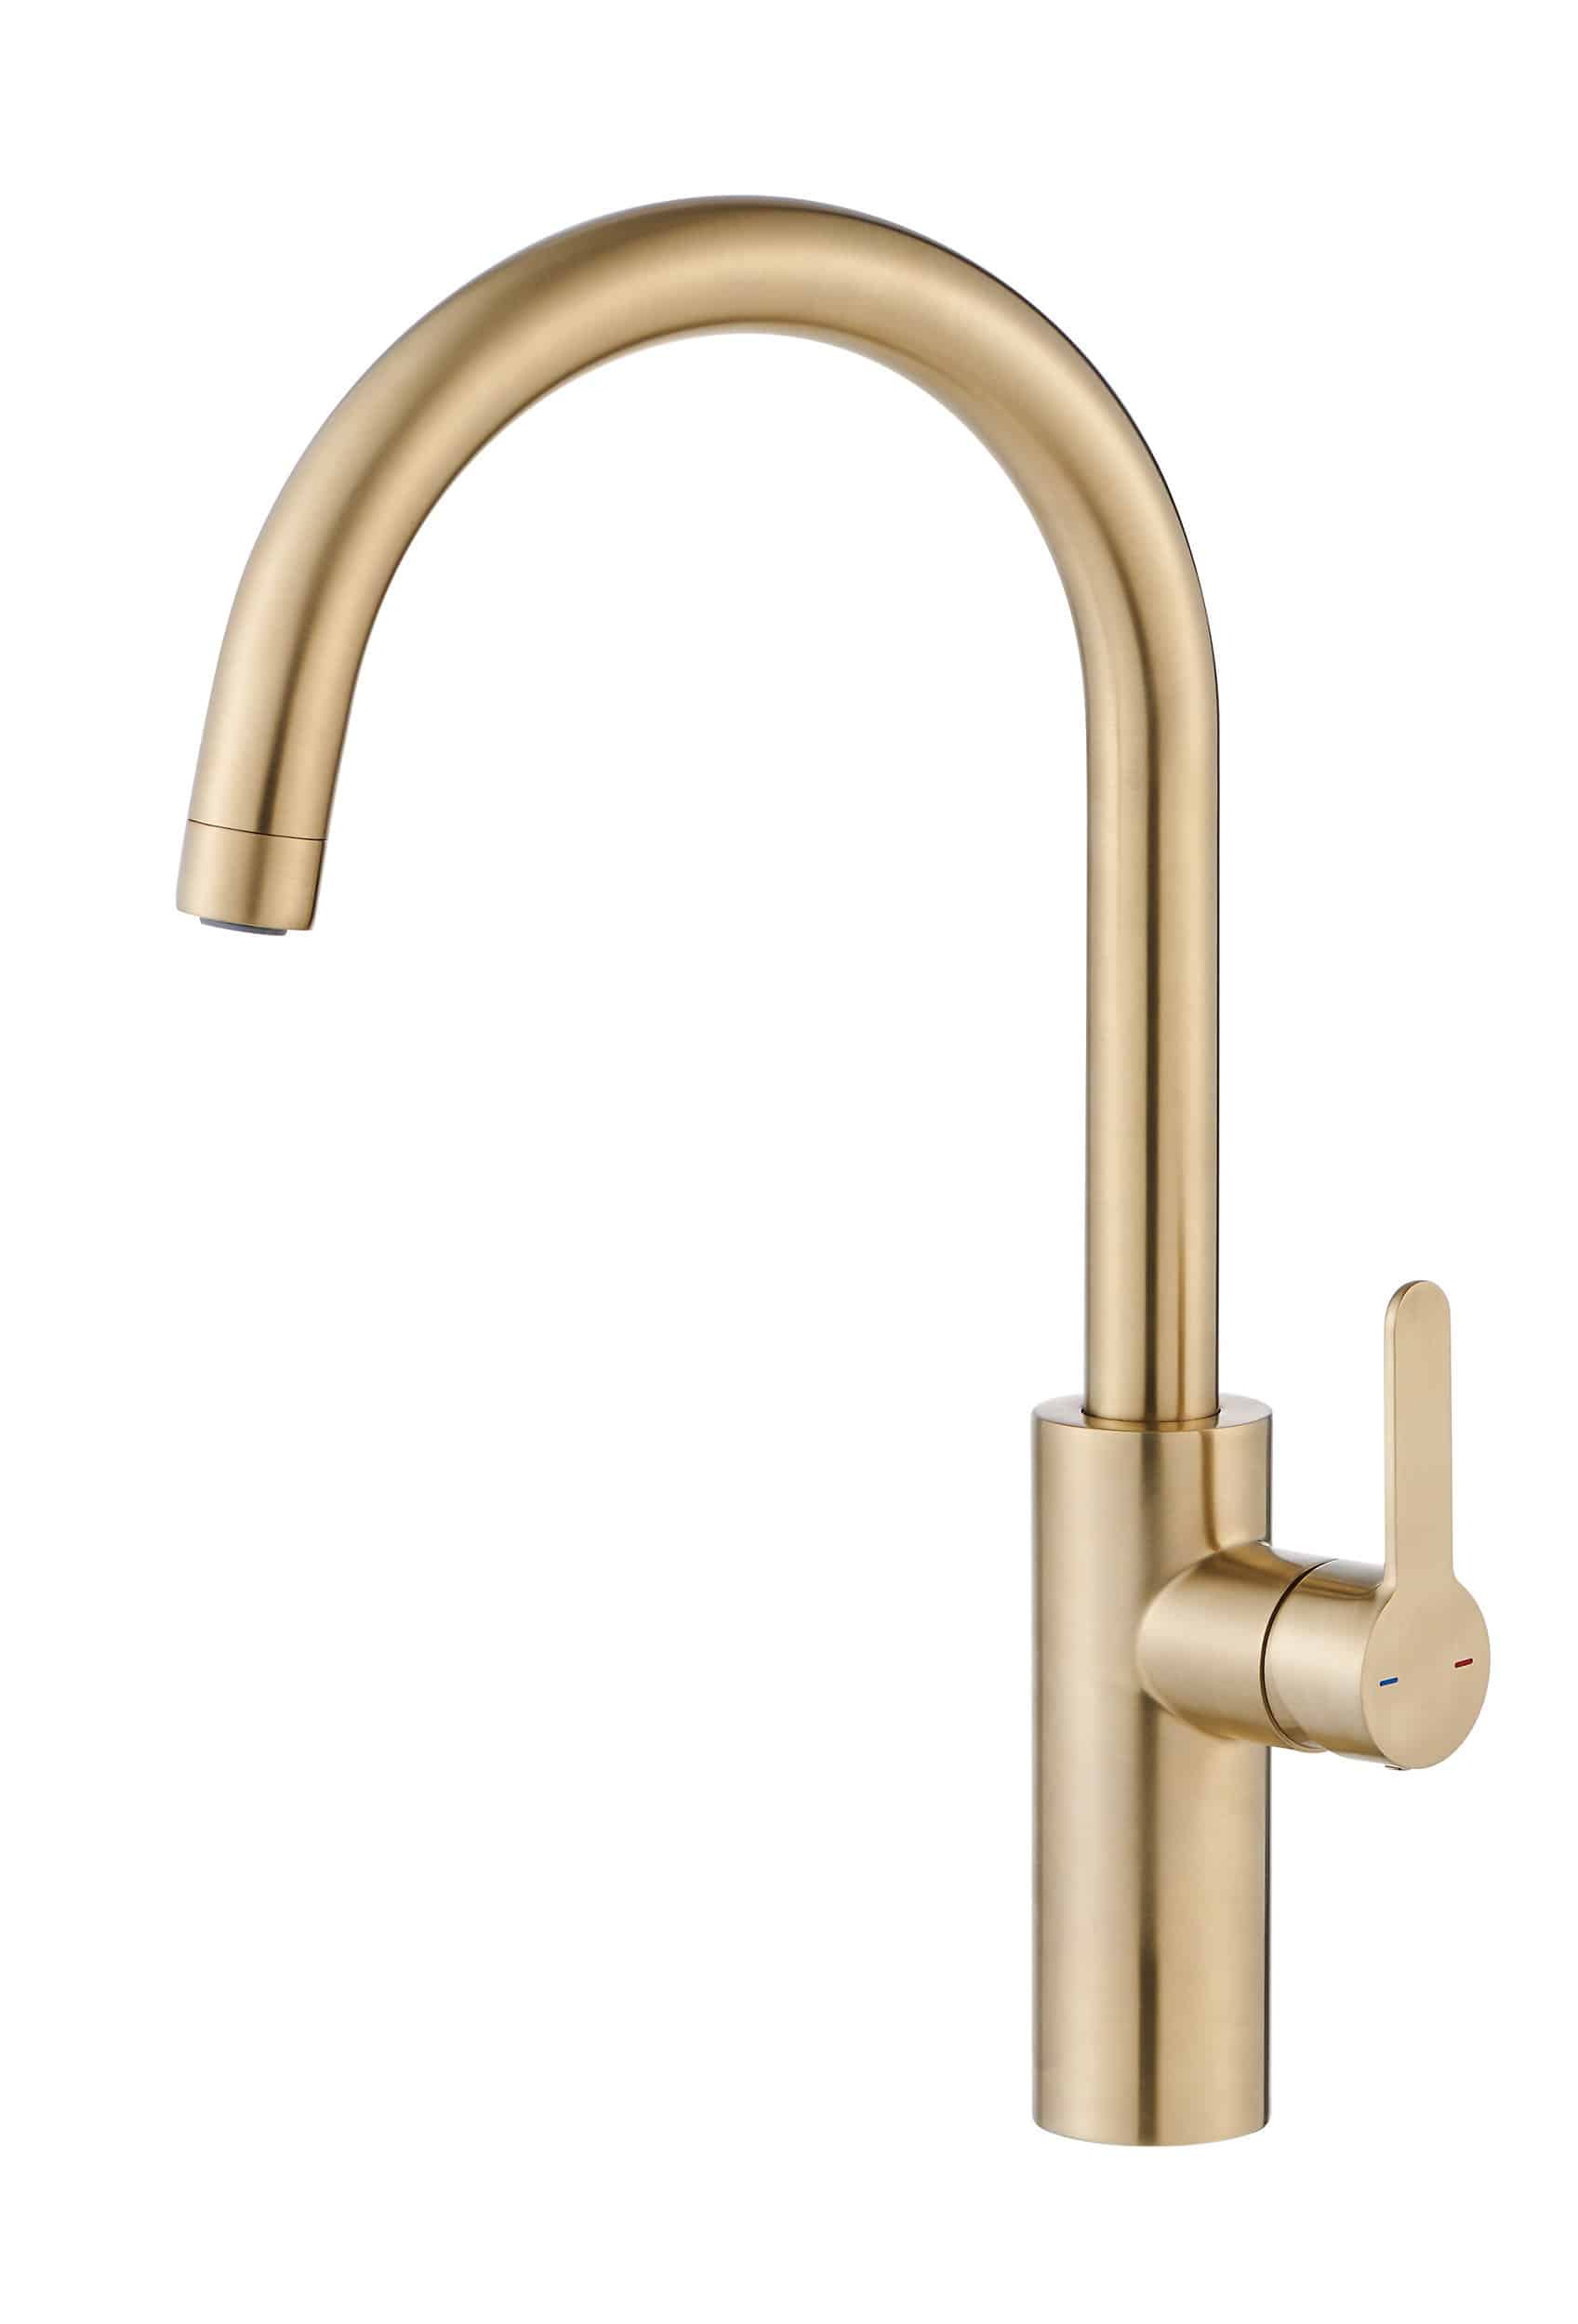 GoodHome Zanthe Brass effect Kitchen Side lever Tap 4346